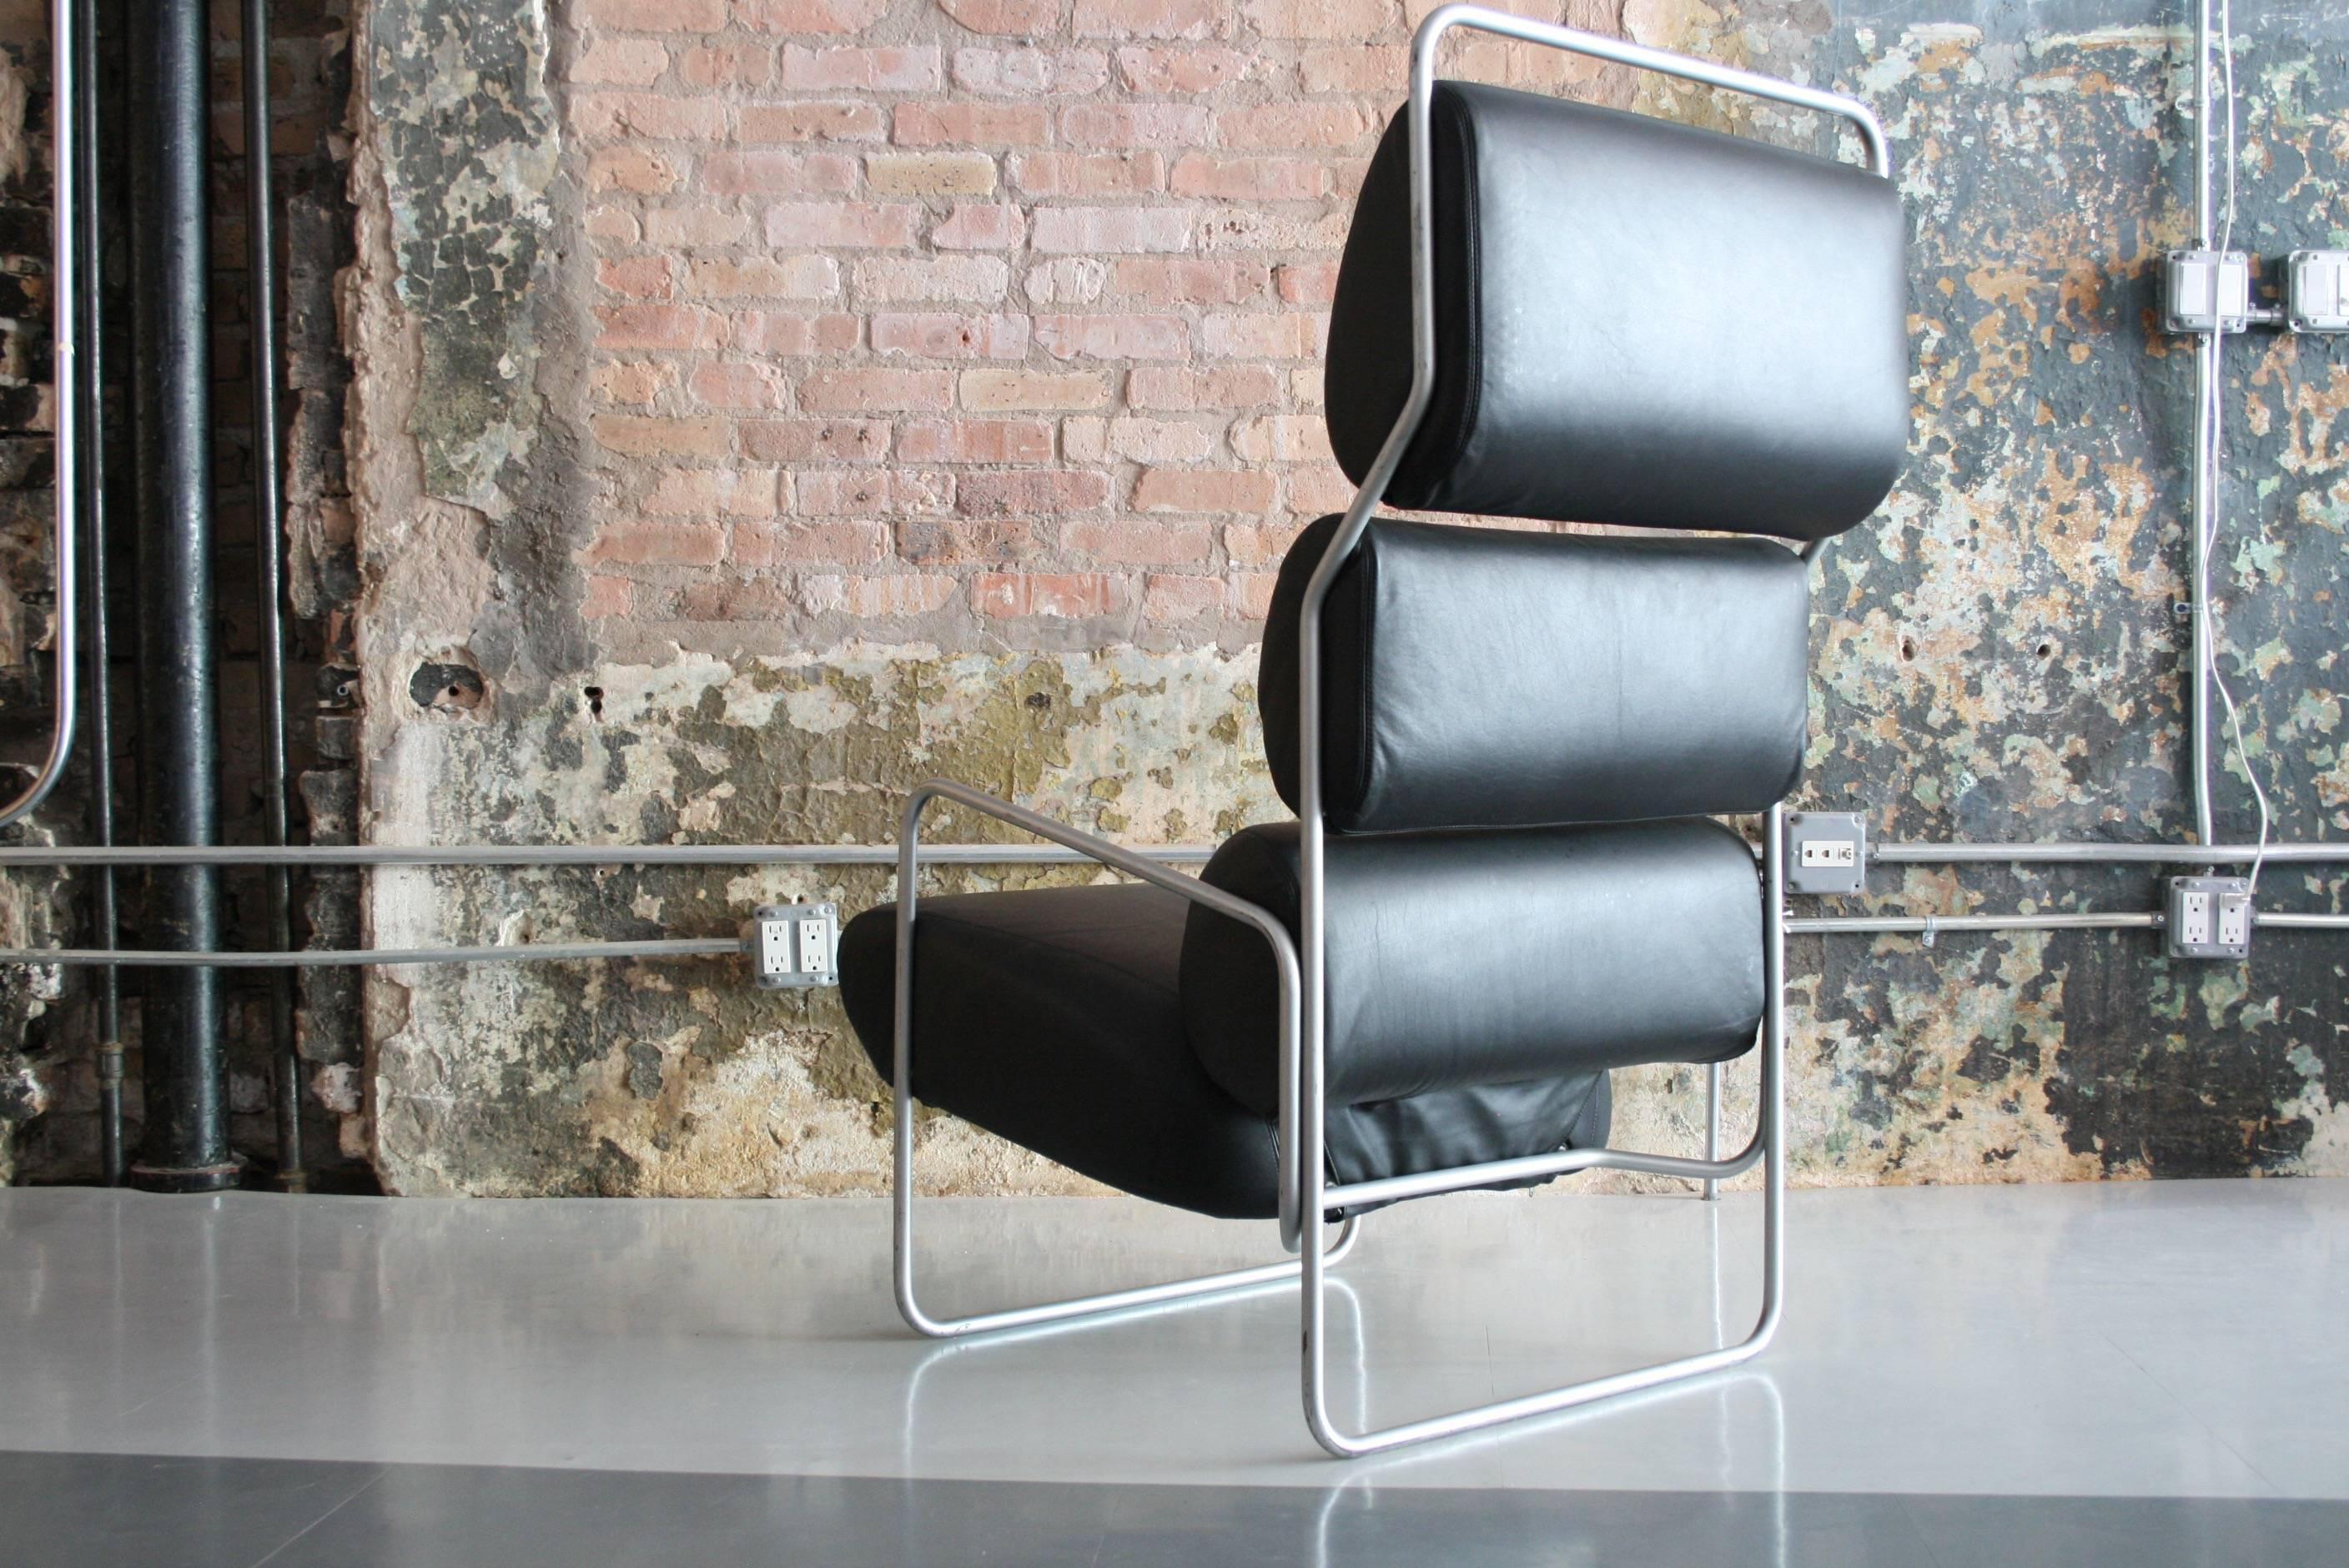 Vintage 1982 San Carlo model armchair in leather designed by Achille Castiglioni for Driade, Italy. The leather is in excellent condition. The Frame has some scratches and wear from use.